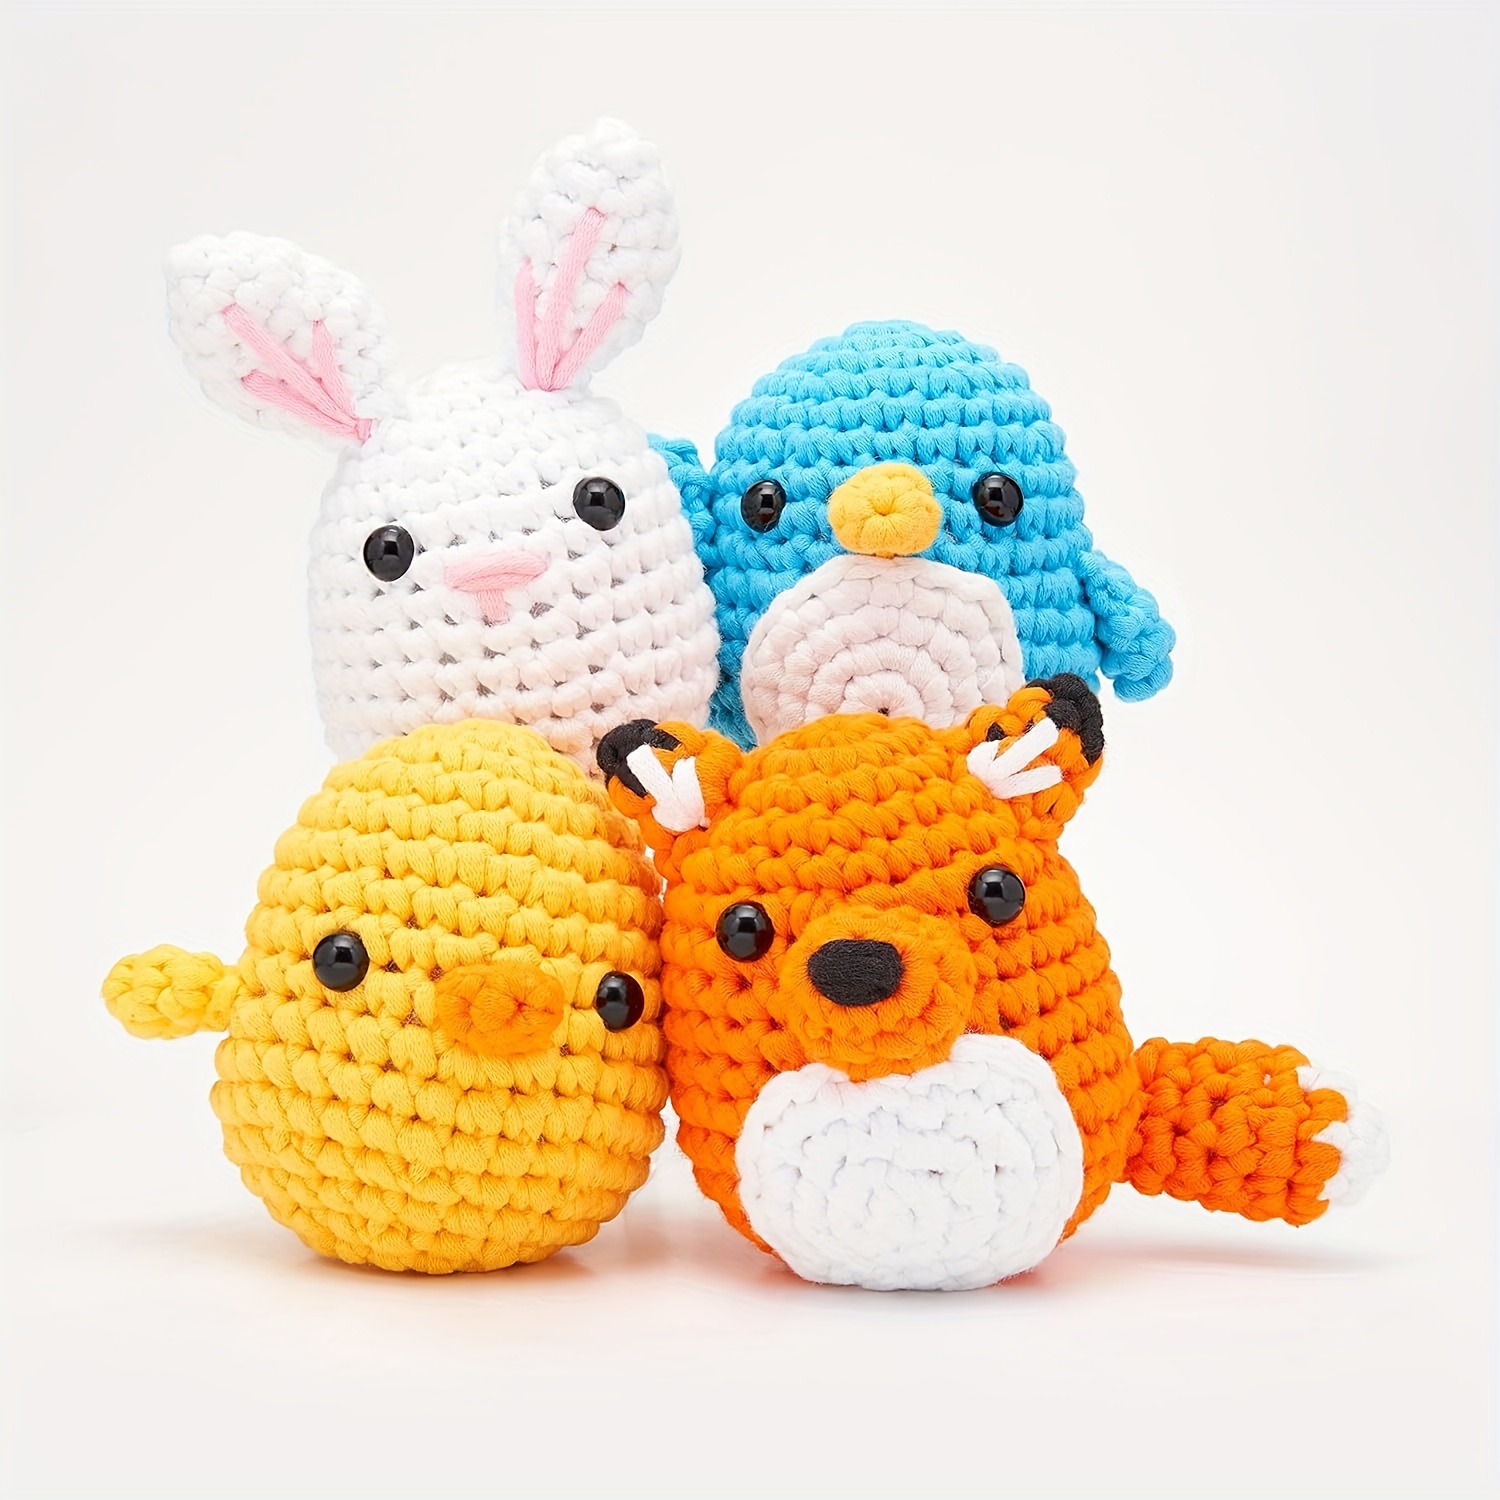 

Beginner Crochet Kit – Easy Peasy Amigurumi Set With Penguin, Chick, Fox & Bunny | Cotton Yarn Crochet Sets For Beginners – Inclusive Hook & Step-by-step Video Tutorials